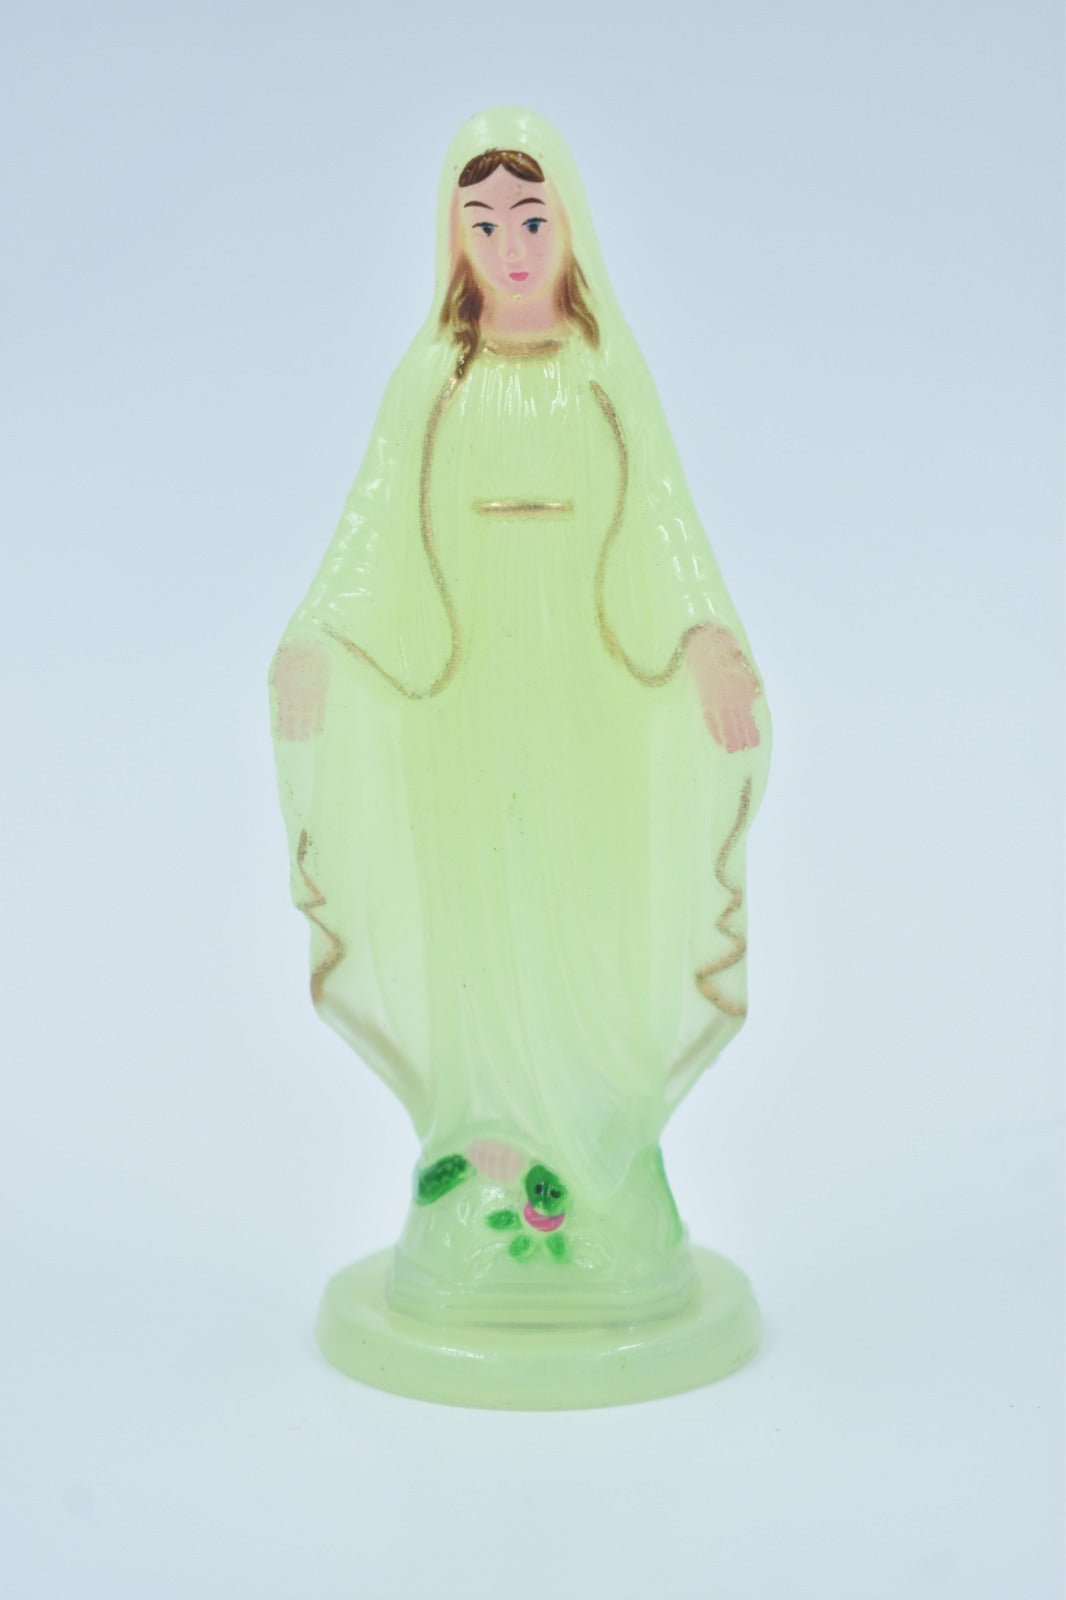 Mother Mary 3 Inch Fluorescent Car Statue - Handcrafted to Illuminate Your Journeys